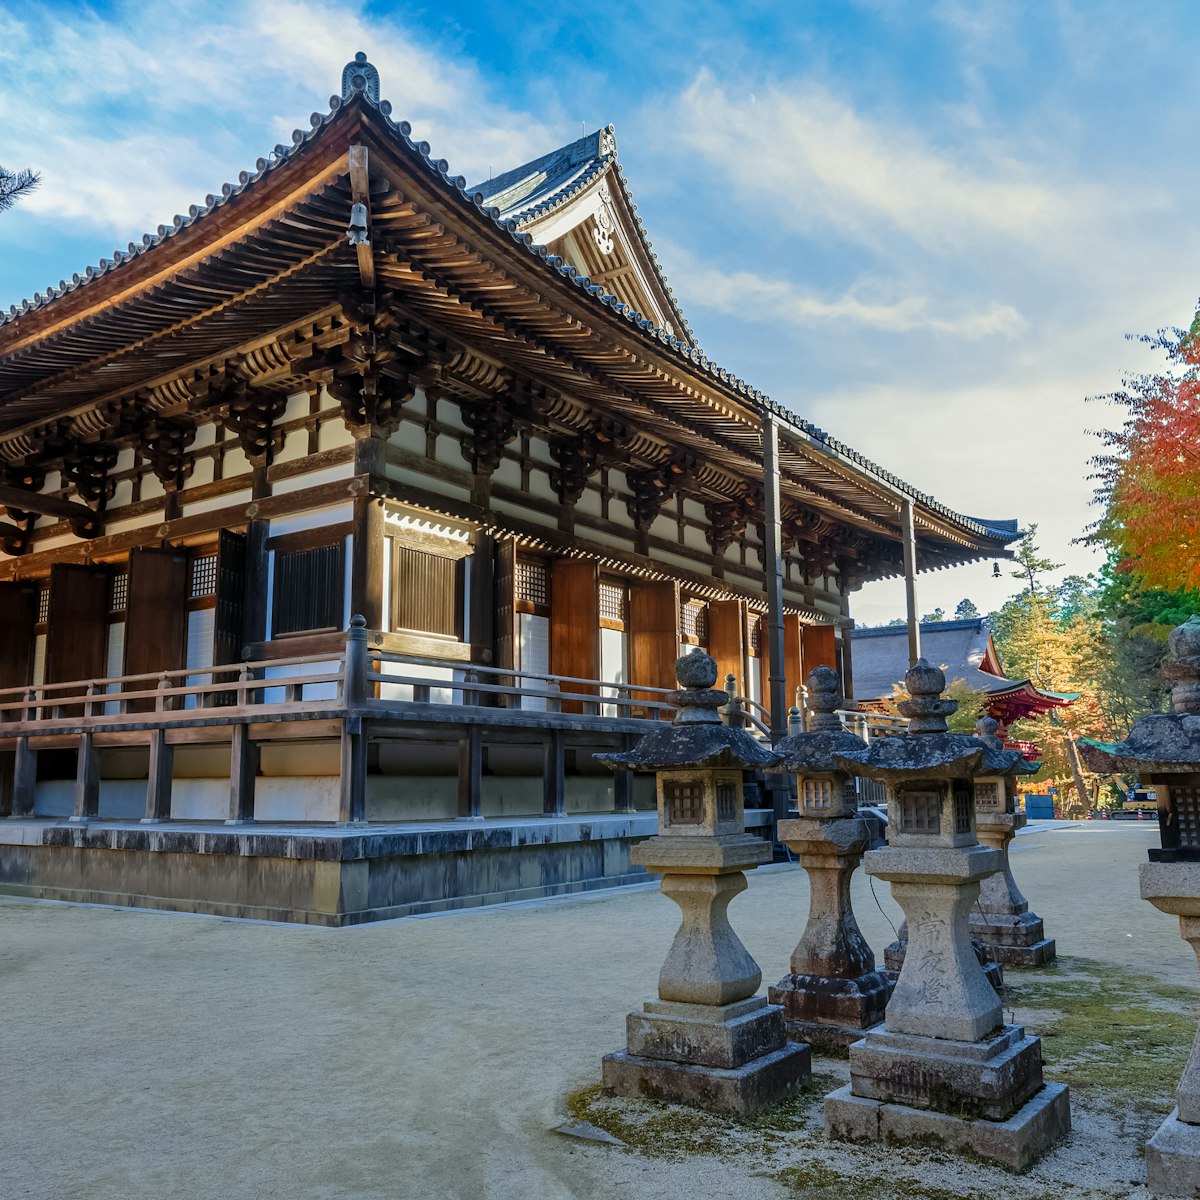 WAKAYAMA, JAPAN - OCTOBER 29: Danjo Garan Temple in Wakayama, Japan on October 29, 2014. Established in 816 by priest "Kukai" as meditating place and it's a part of Kongobuji temple in Mt. Koya; Shutterstock ID 303576560; Your name (First / Last): Laura Crawford; GL account no.: 65050; Netsuite department name: Online Editorial; Full Product or Project name including edition: Kii Peninsula page online images for BiT